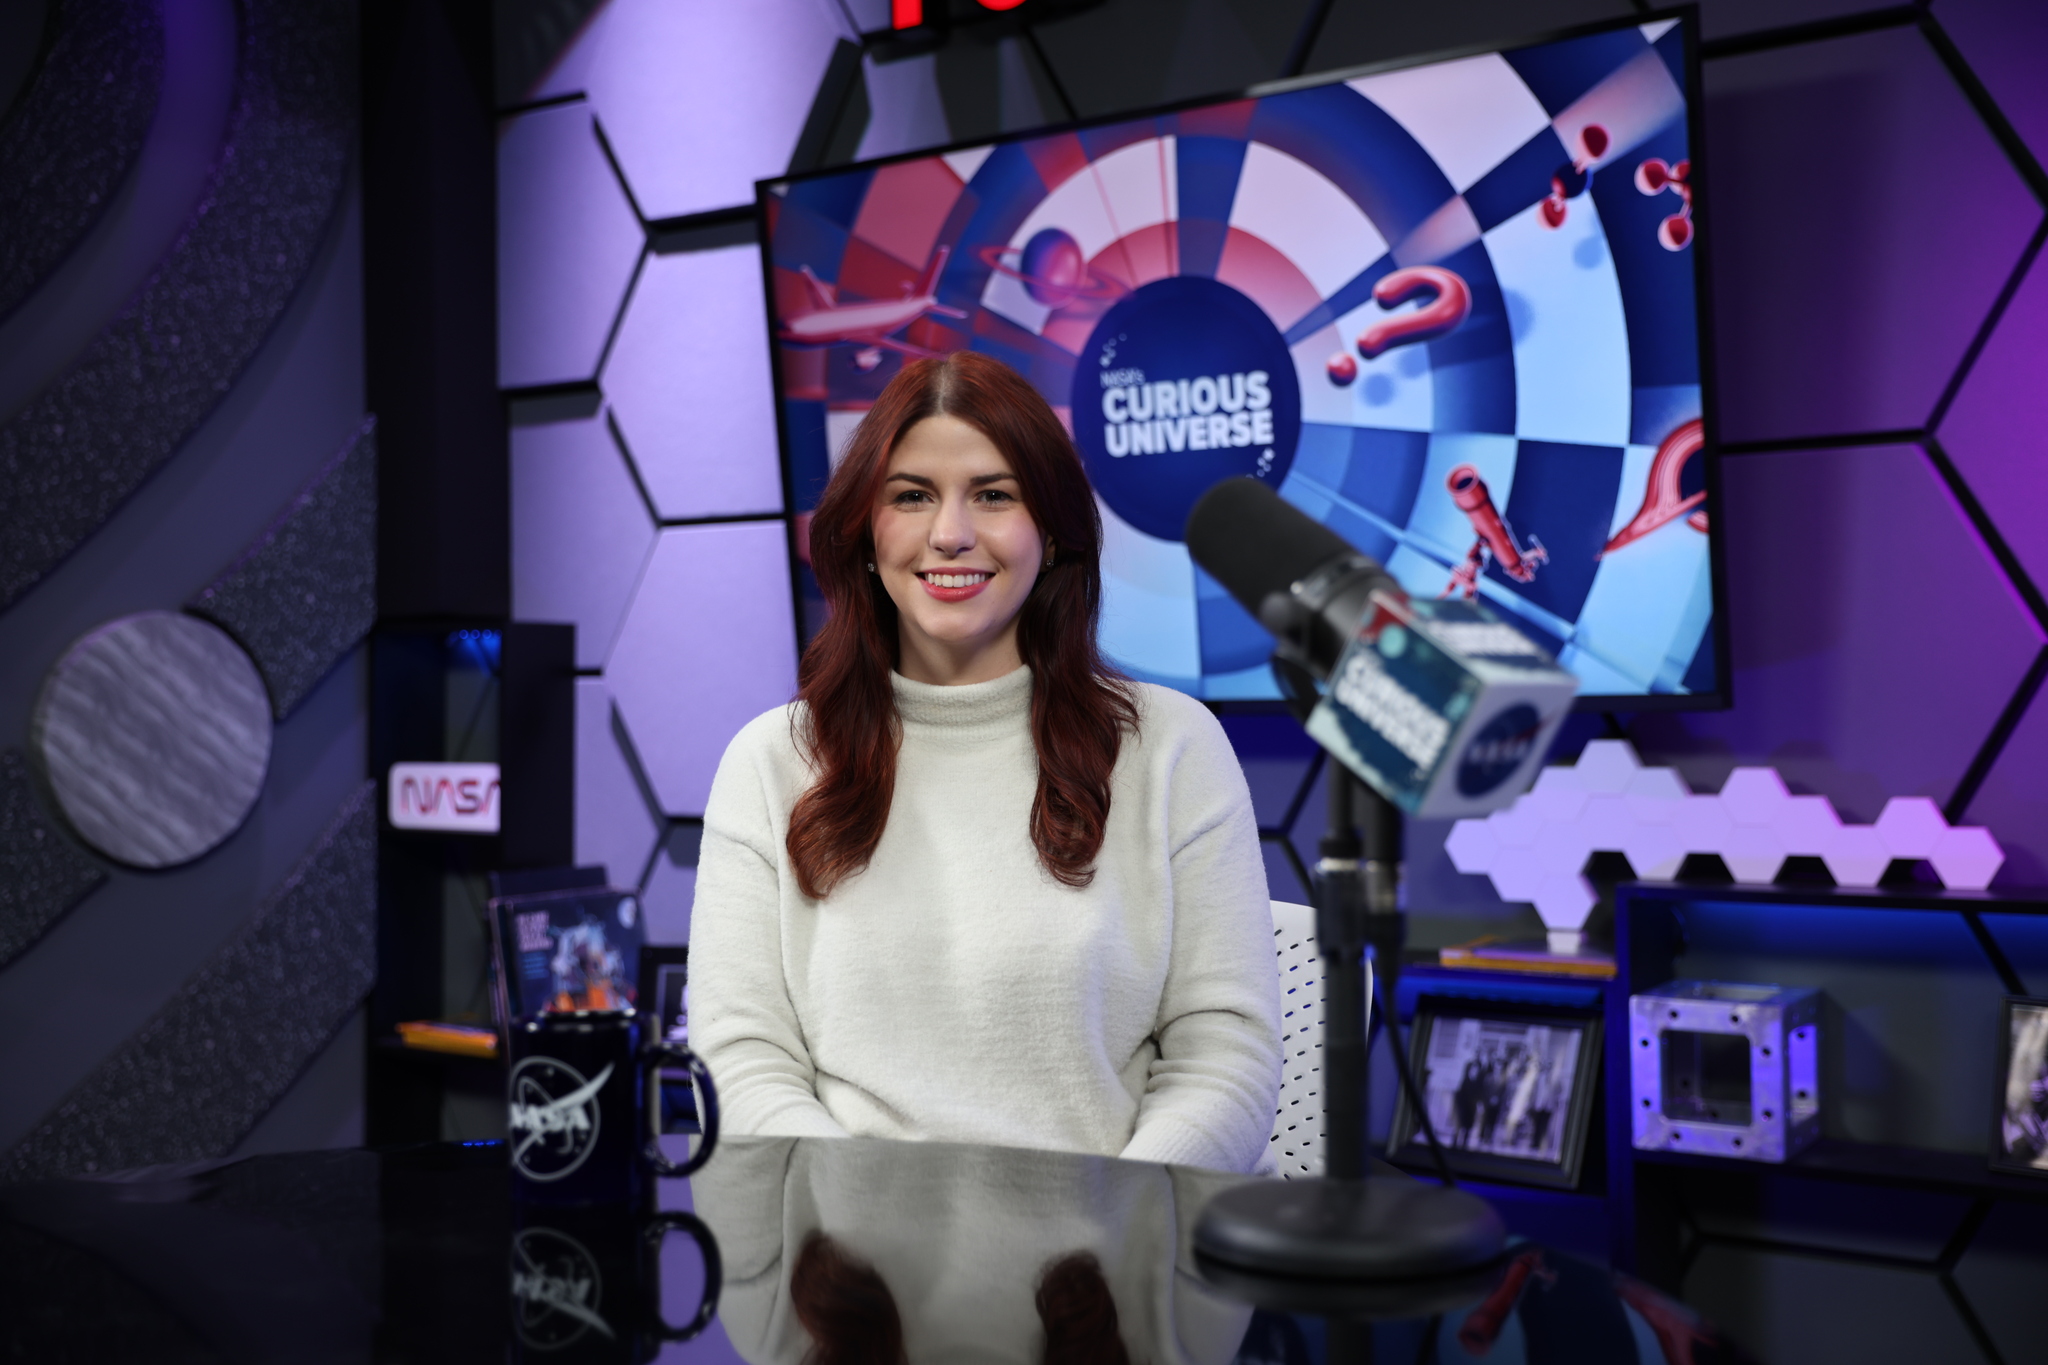 Katie Konans sits at a dark-colored desk wearing a white sweater with long brown hair. Behind her is a TV screen with the Curious Universe logo.